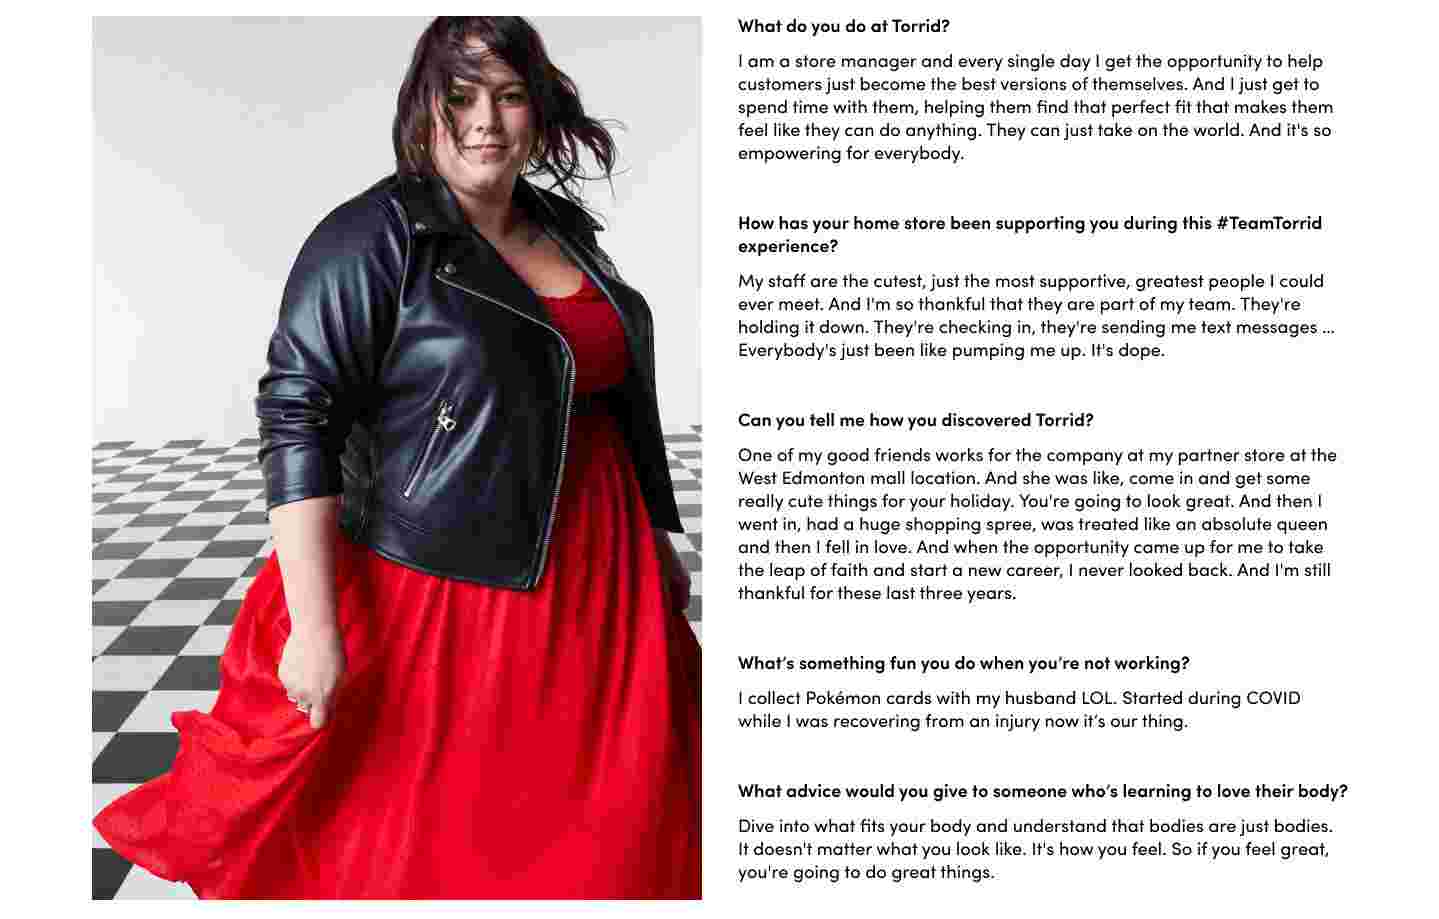 What do you do at Torrid? I am a store manager and every single day i get the opportunity to help customers just became the best versions of themselves. And i just get to spend time with them, helping them find that perfect fit that makes them feel like they can do anything. They can just take on the world. And it's so empowering for everybody. How has your home store been supporting you during this #TeamTorrid experience? My staff are the cutest, just the most supportive, greatest people I could ever meet. And i'm so thankful that they are part of my team. They're holding it down. They're chekcing in, they're sending me text messages.. Everybody's just been like pumping me up. it's dope. Can you tell me how you discovered Torrid? One of my good friends works for the company at my partner sotre at West Edmonton mall location. And she was like, come in and get some really cute thigs for your holidy. You're going to look great. And then I went in, had a huge shopping spree, was treated like an absolute queen and then I fell in love. And when the opportunity came up for me to take the leap of faith and start a new career, I never looked back. And i'm still thankful for these last three years. What's something fun you do when you're not working? I collect pokemon cards with my husband LOL. Started during COVID while I was recovering from an injury now it's our thing. What advice would you give to someone who's learnign to love their body? Dive into what fits your body and understand that bodies are just bodies. It doesn't matter what you look like. It's how you feel. So if you feel greate, you're going to do great things.